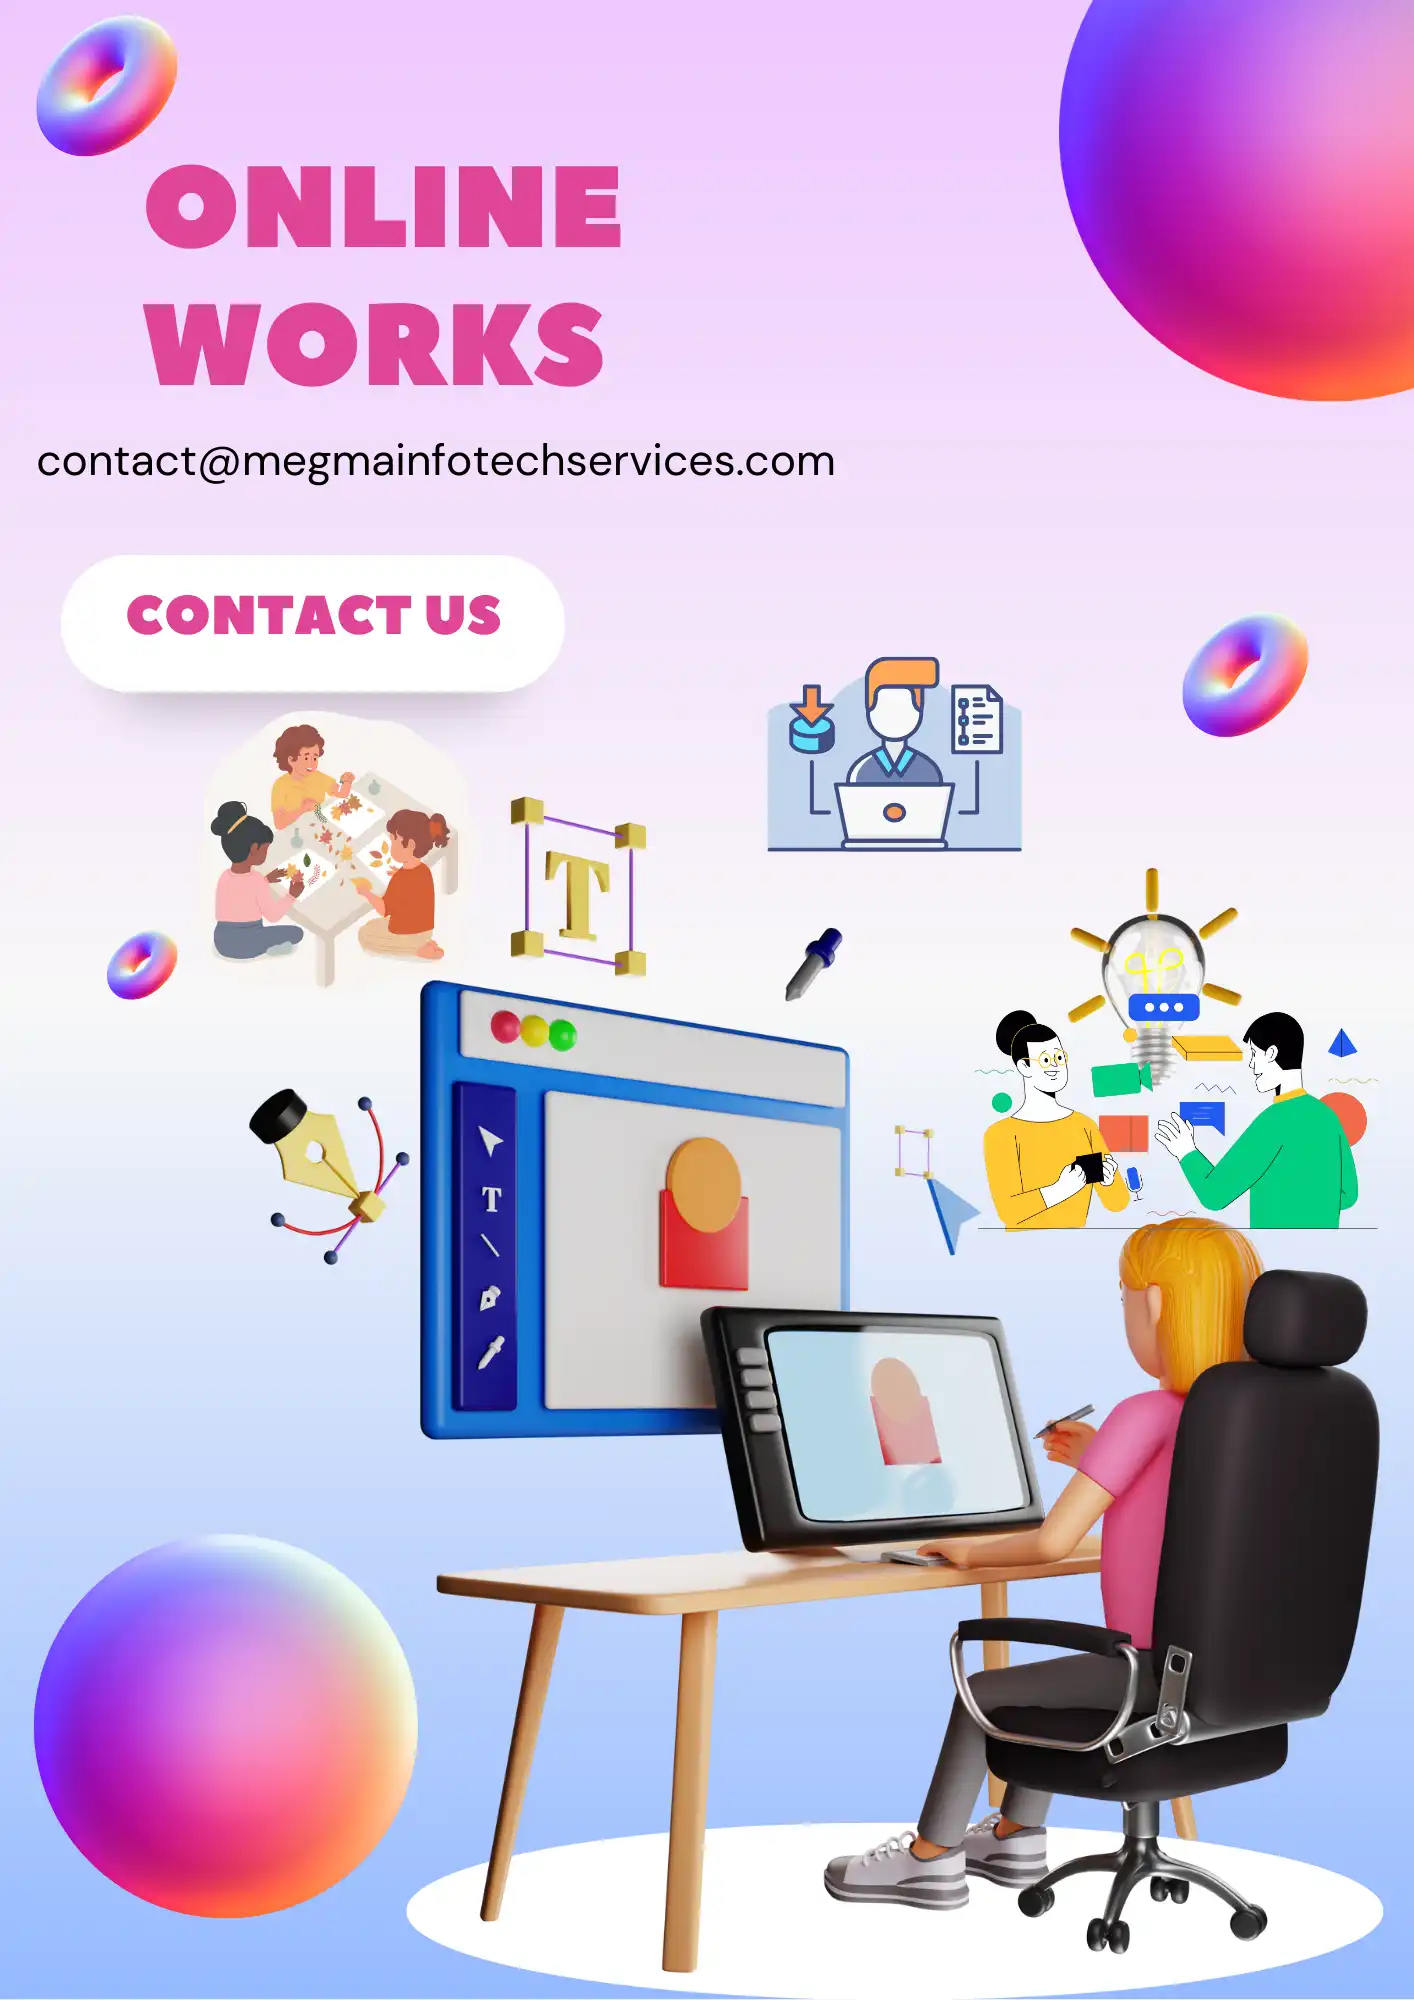 Online data entry works, Project works, Animation works, Video editing works